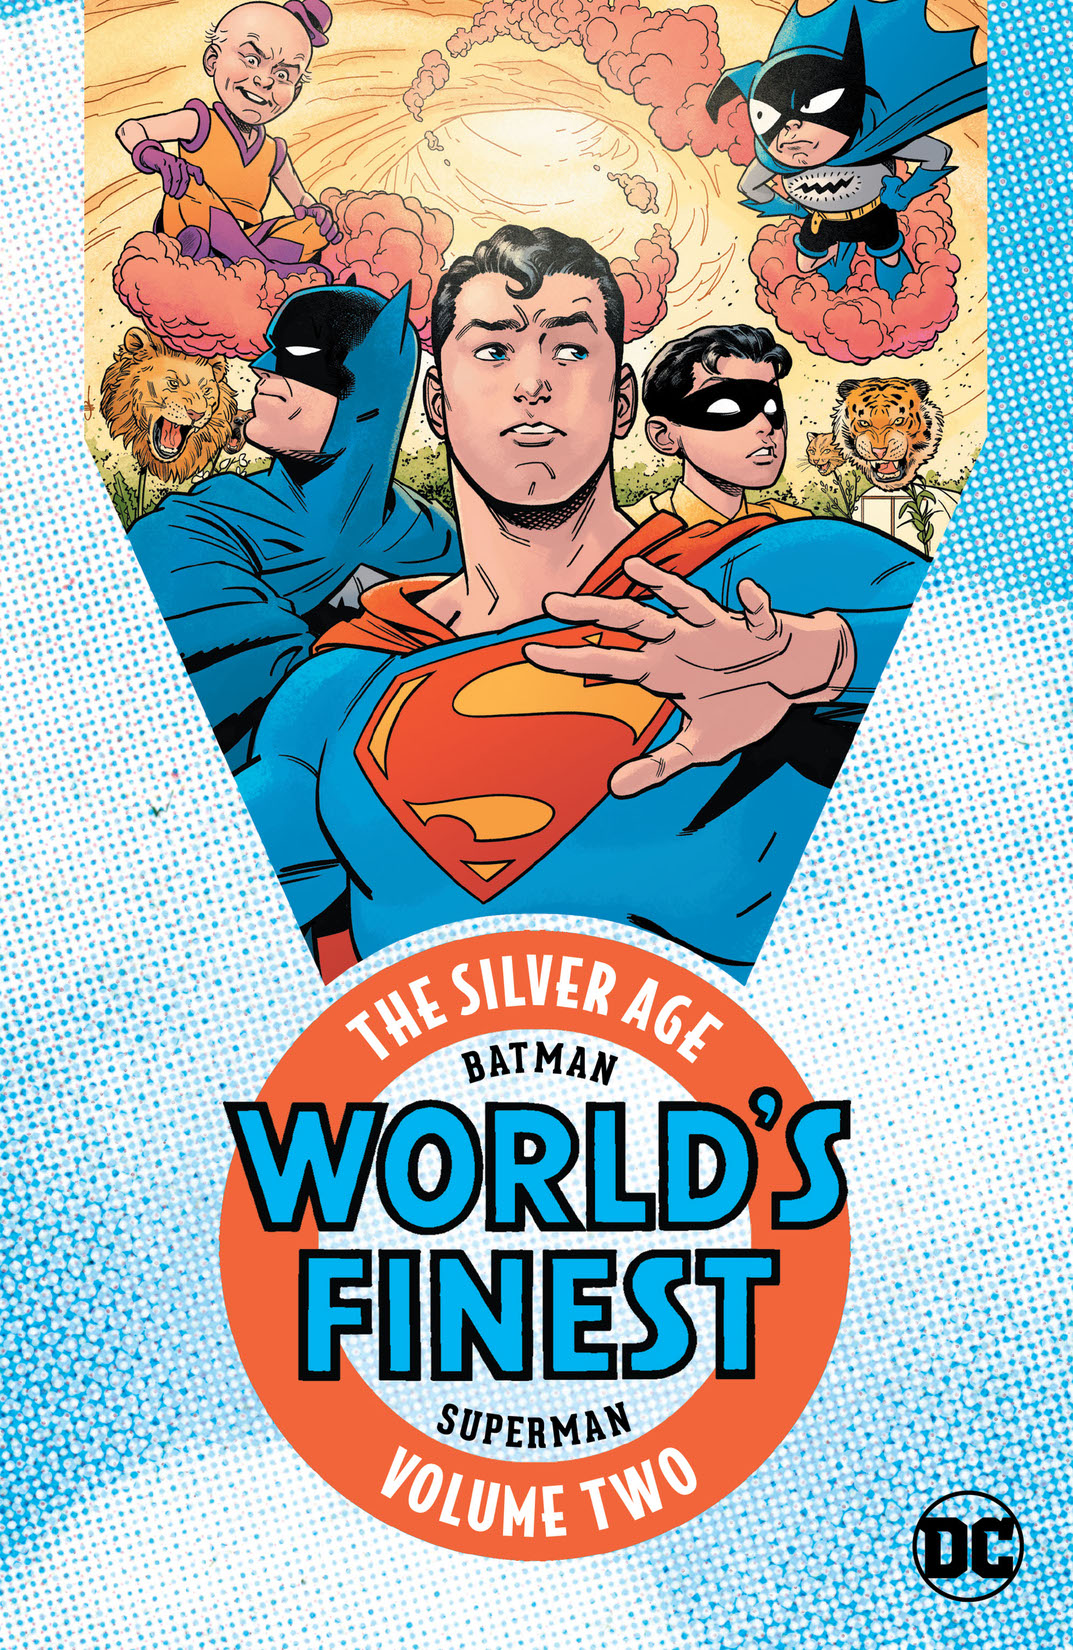 Batman & Superman in World's Finest: The Silver Age Vol. 2 preview images